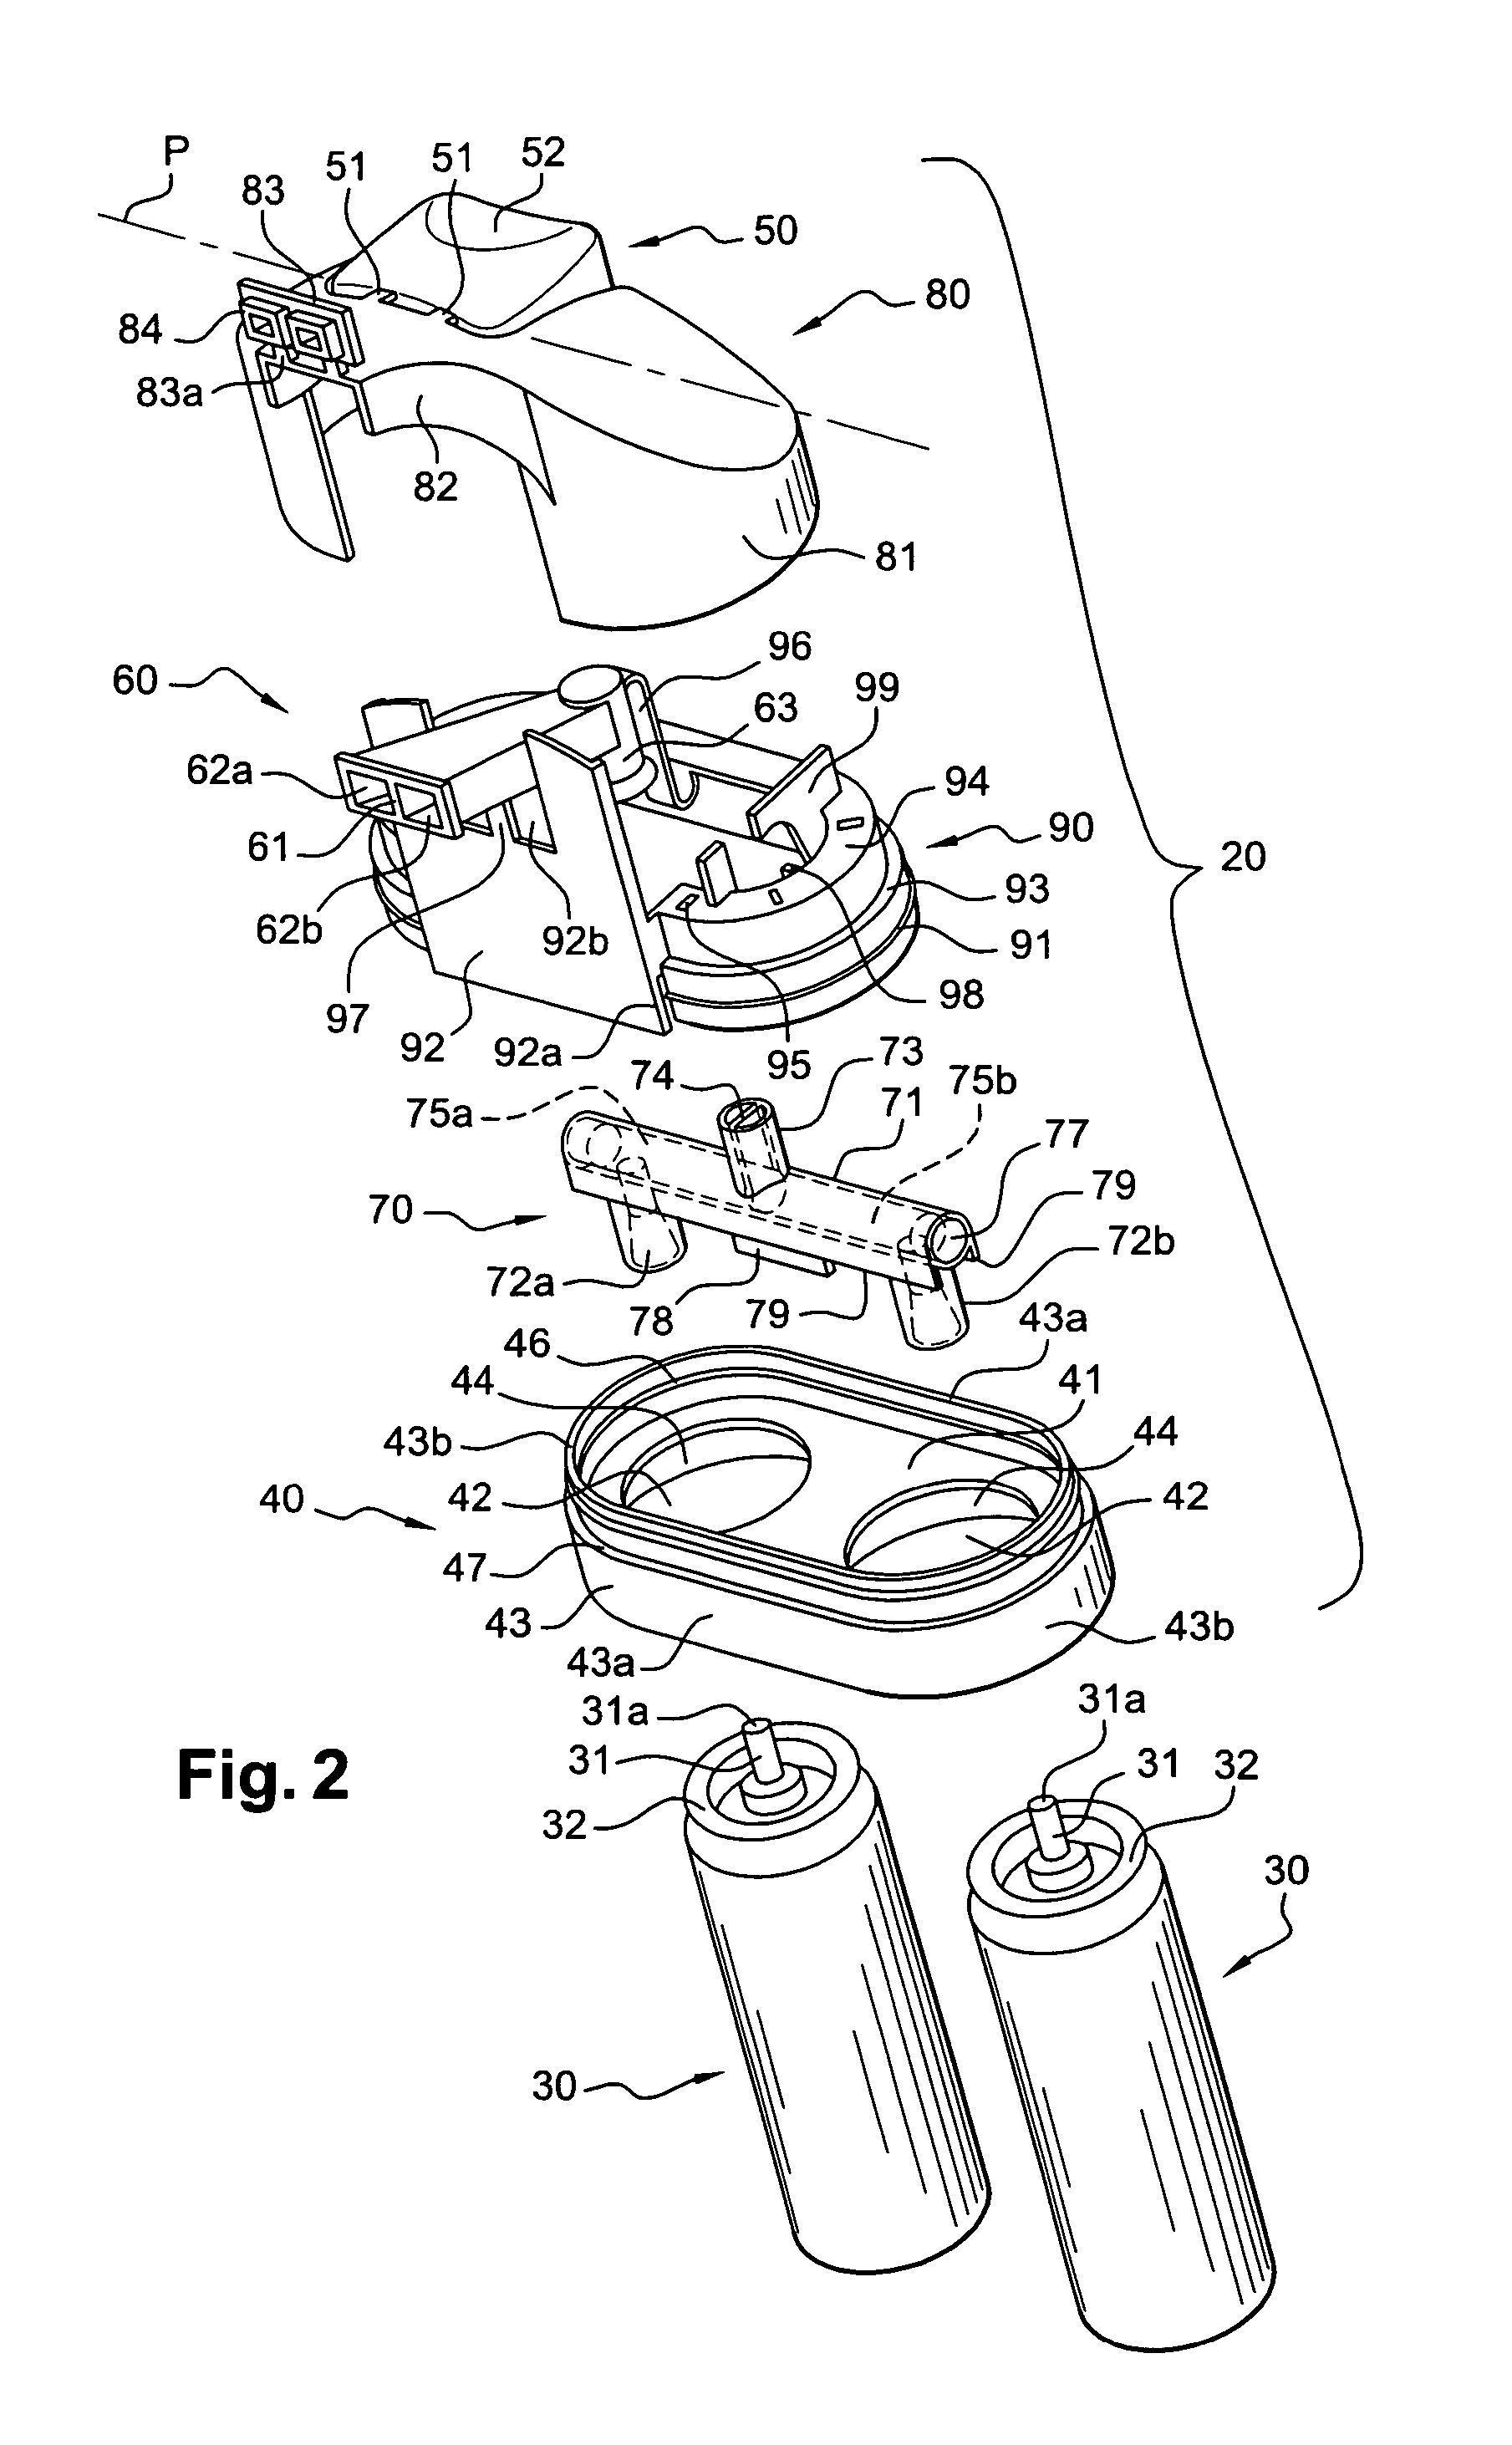 Distribution assembly intended for contemporaneous distribution of two products